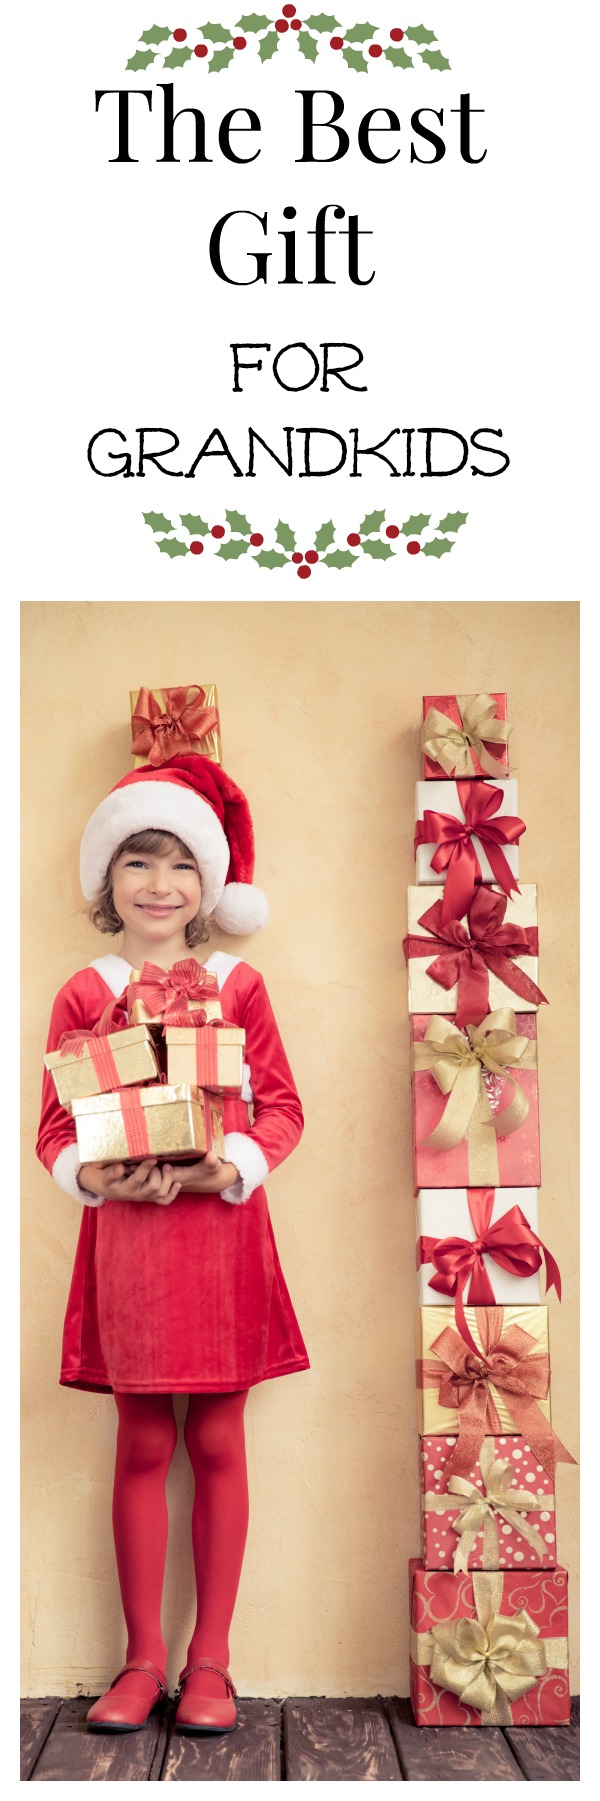 Finding just the best gift for grandkids for Christmas can be a challenge. Here are a few thoughts about what gifts are the most lasting.